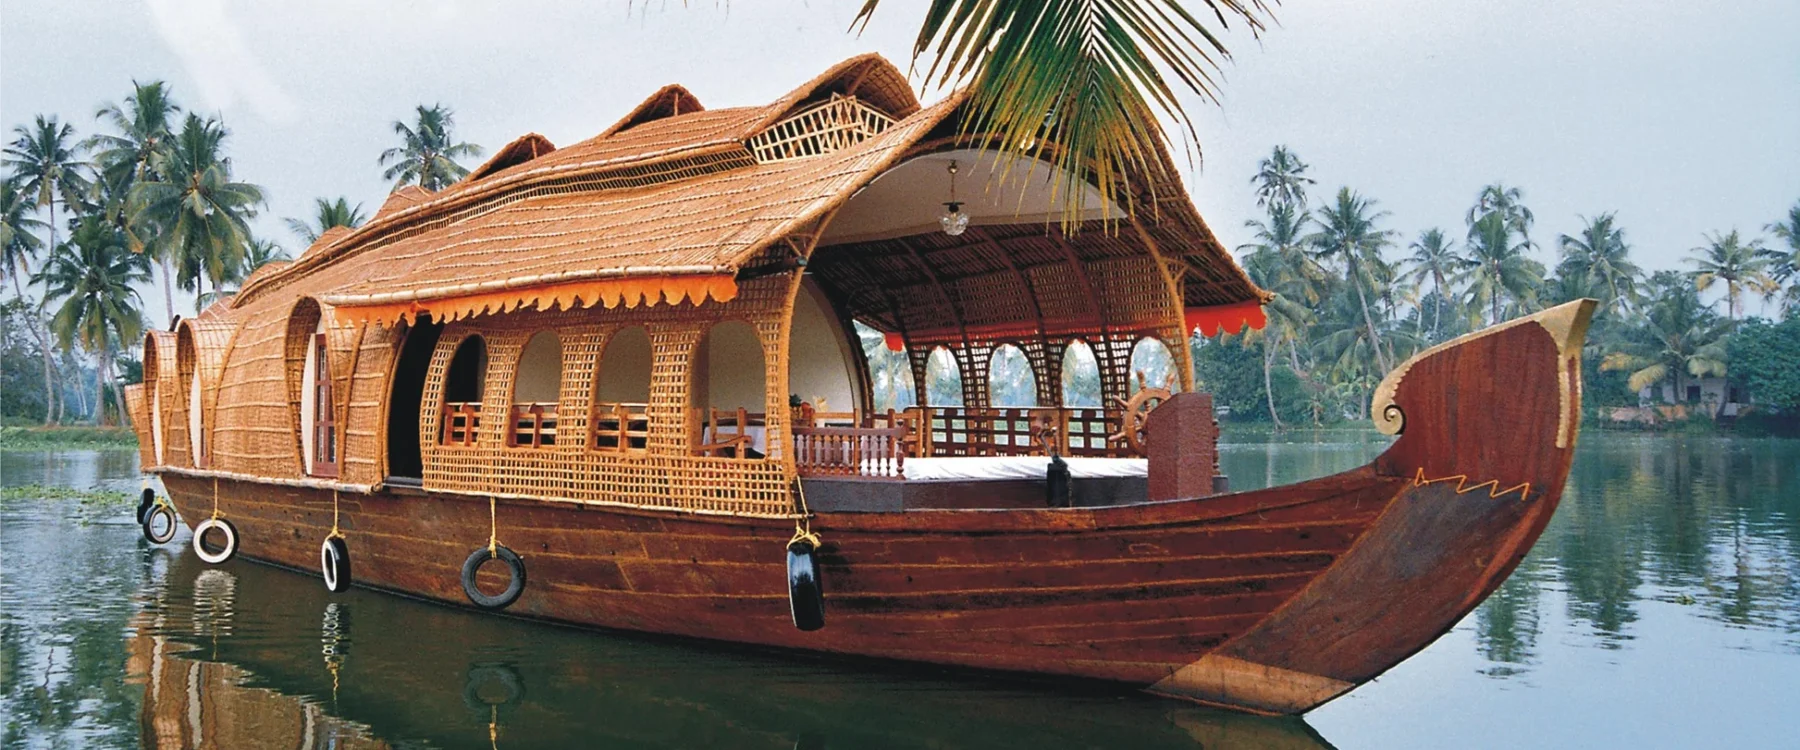 Fun Kerala Holiday with Houseboat Stay